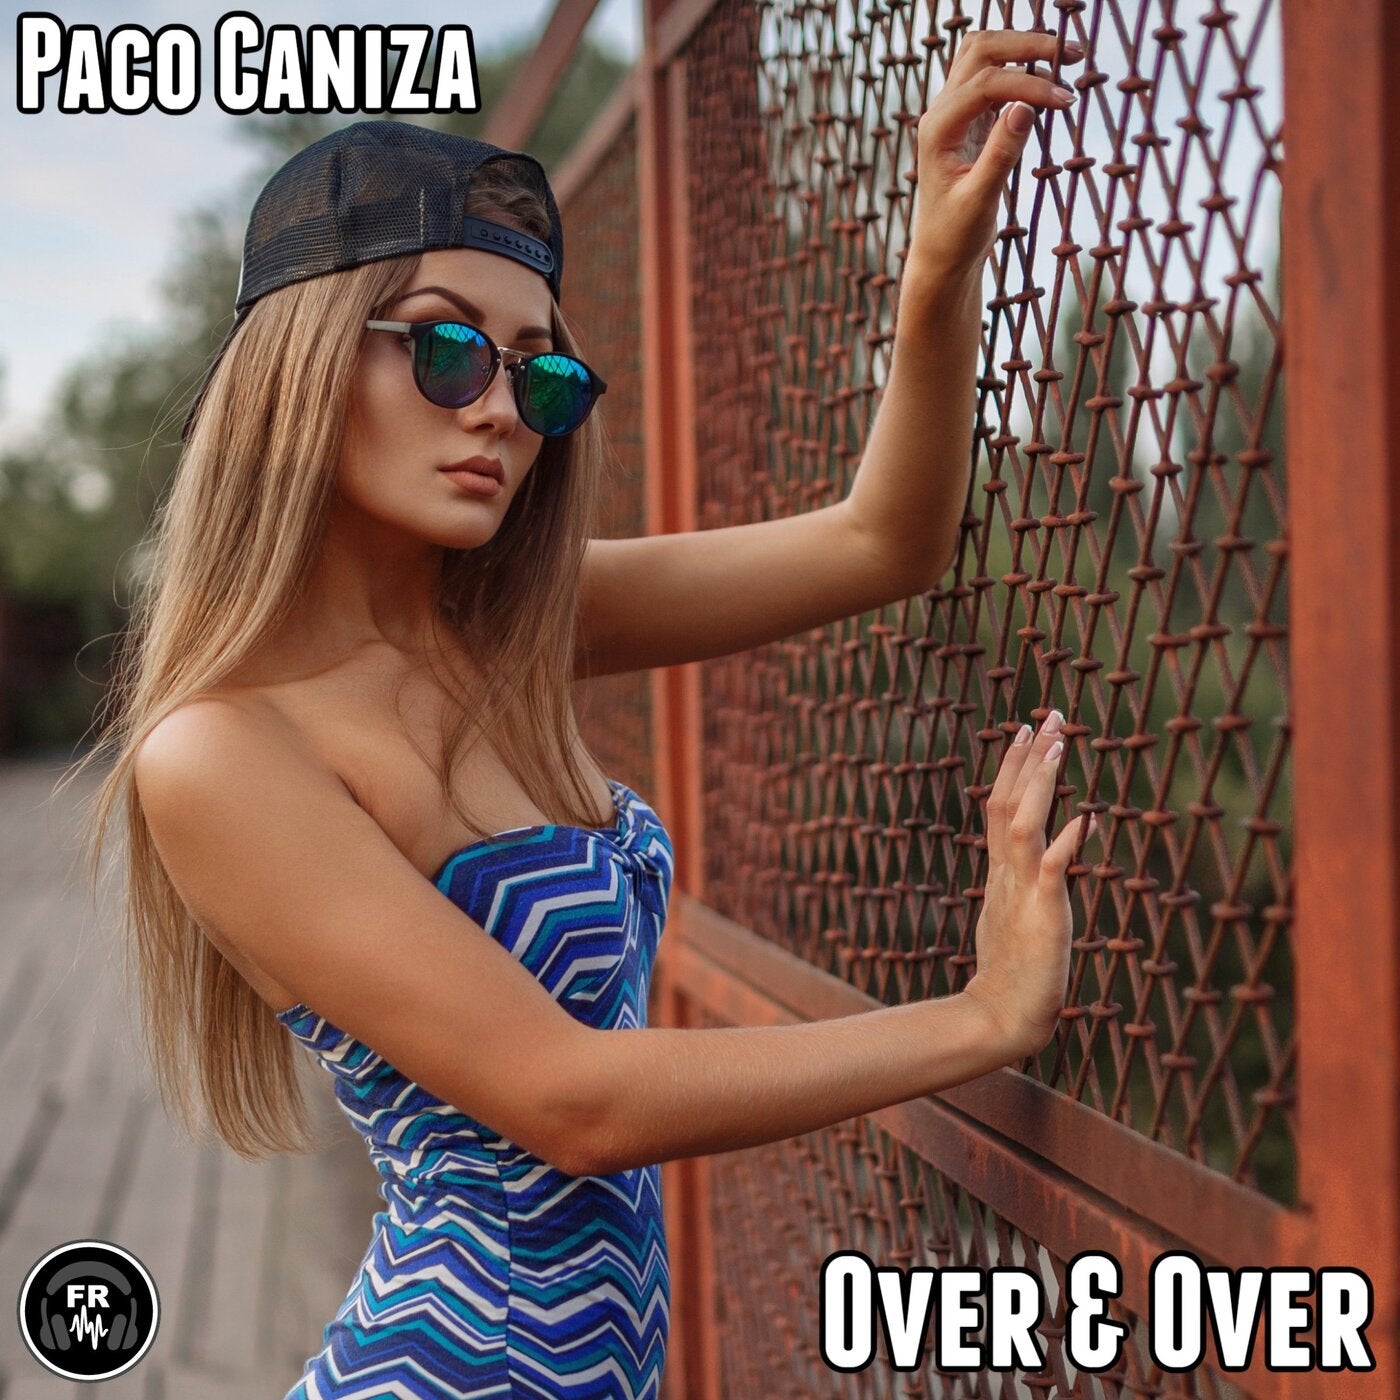 Over funk. Paco Caniza from.